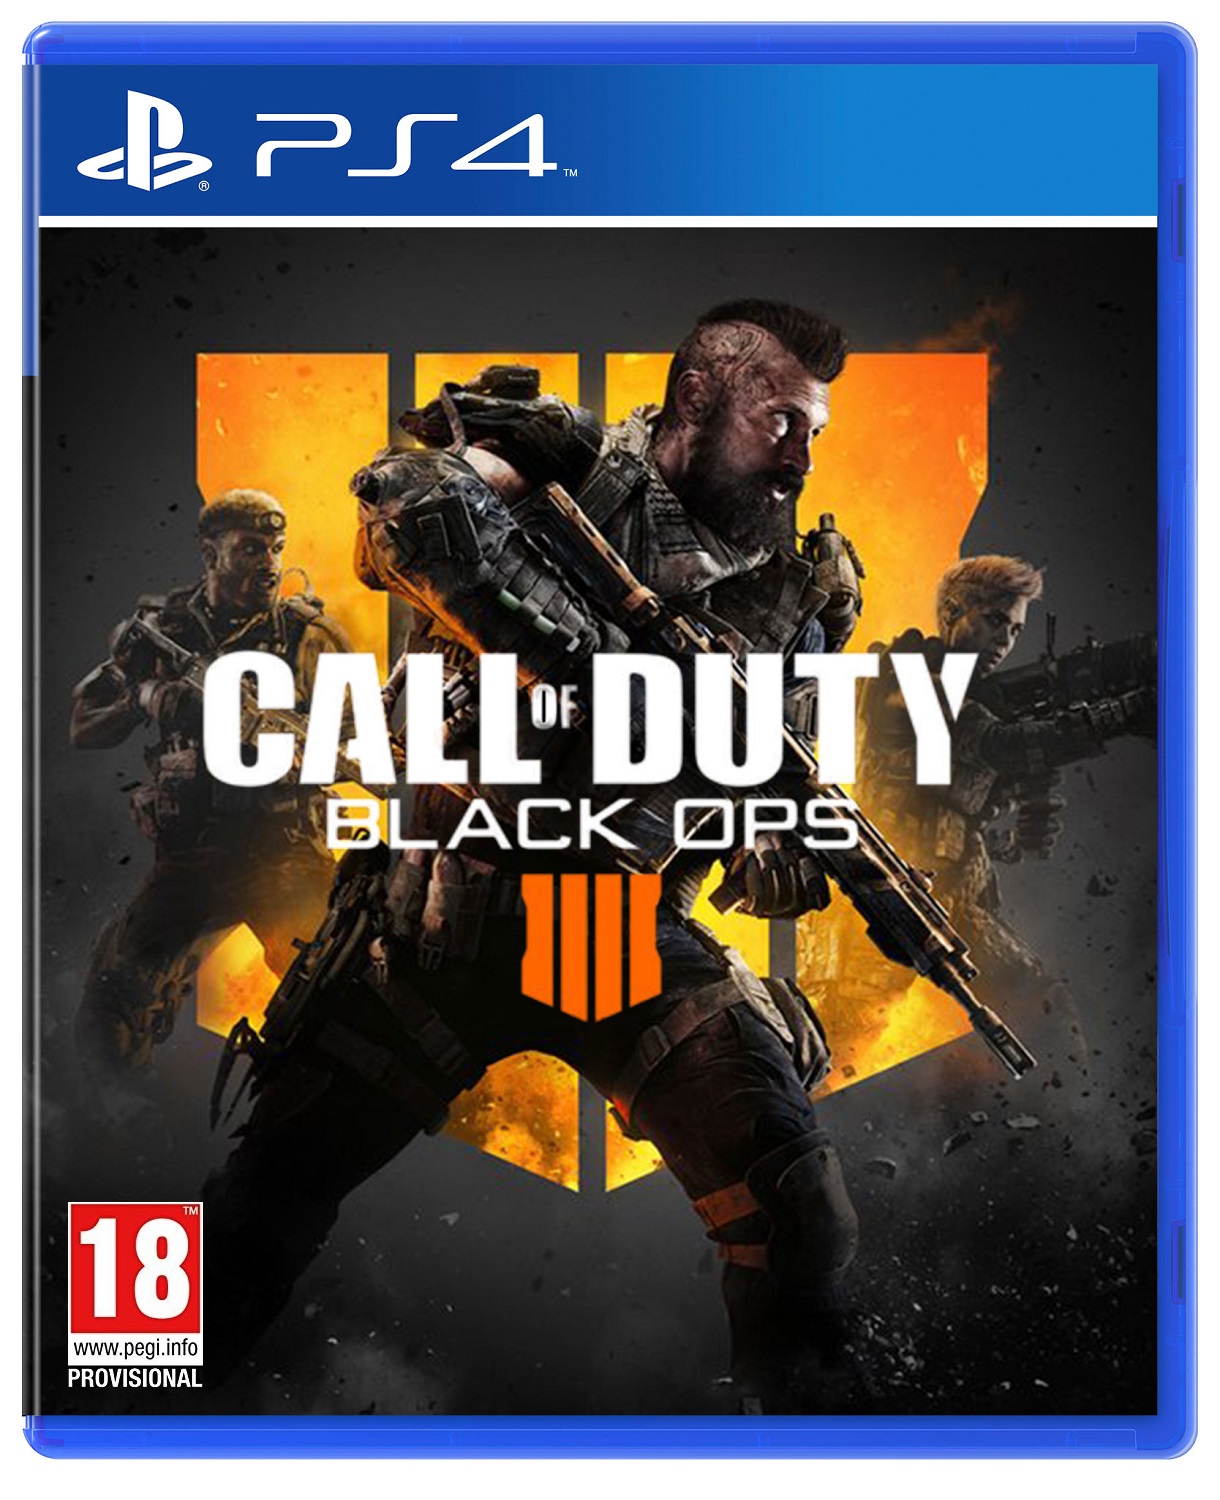 black ops 4 call of duty